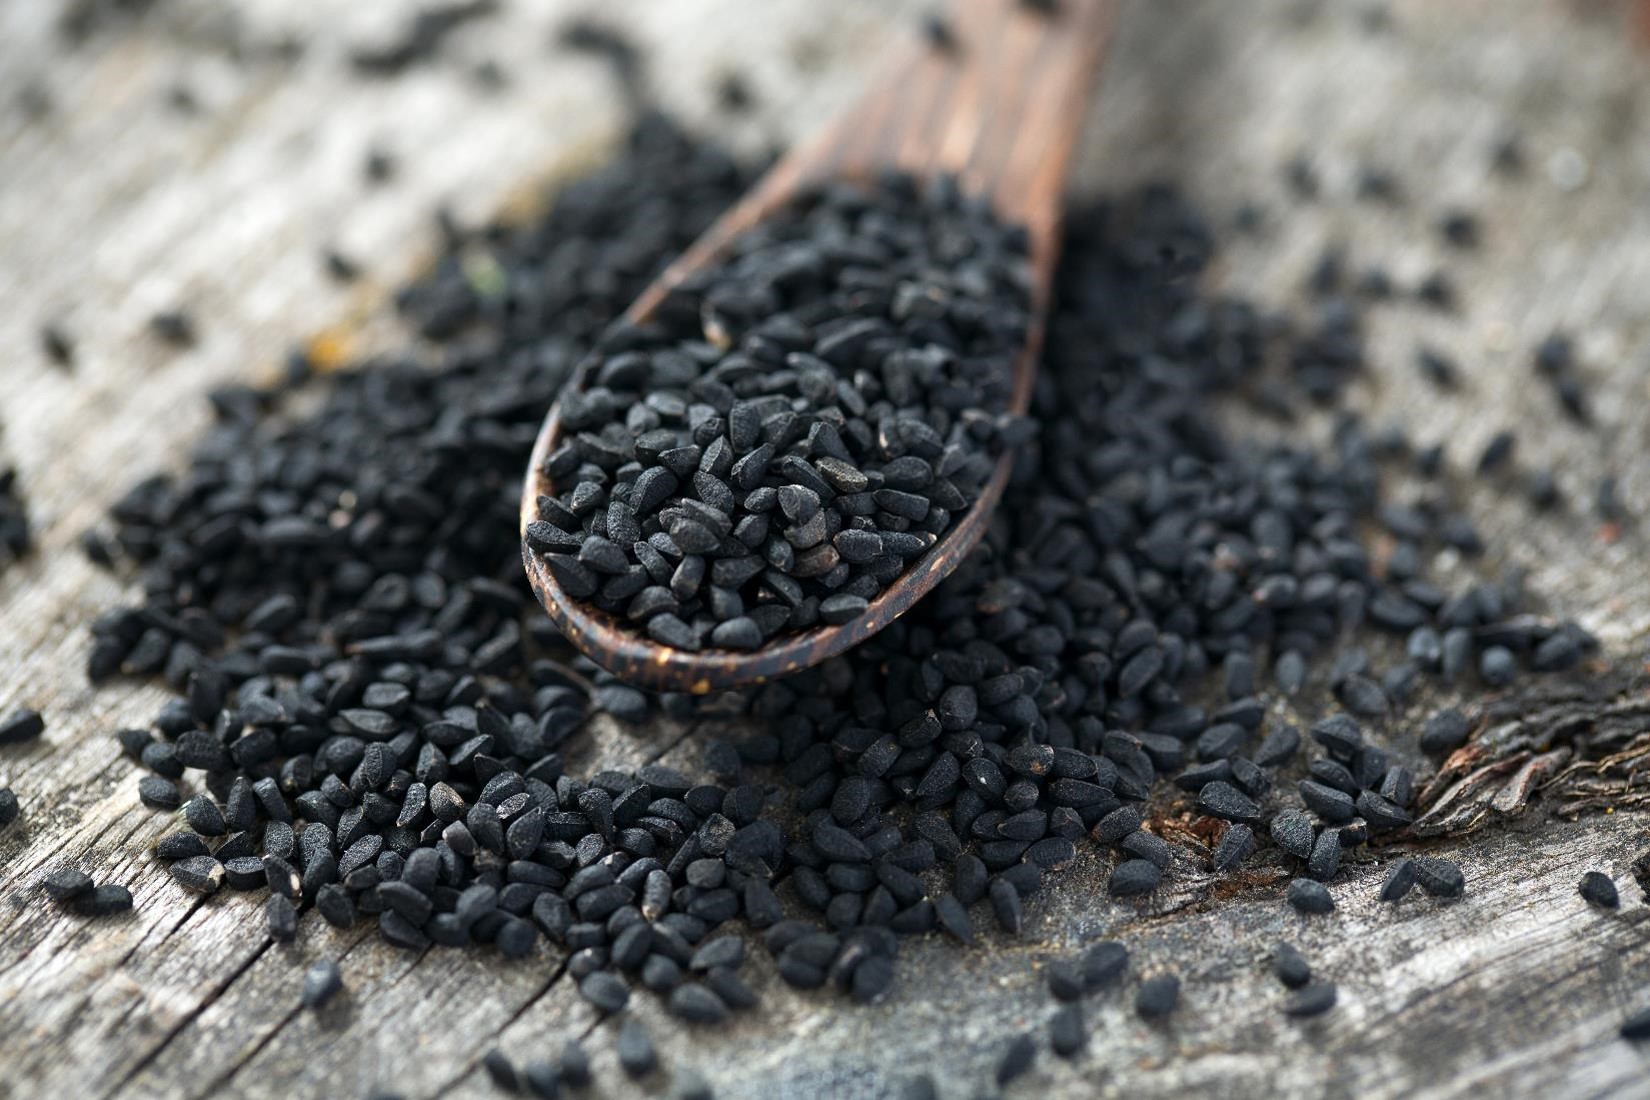 FIND OUT MORE ABOUT NIGELLA